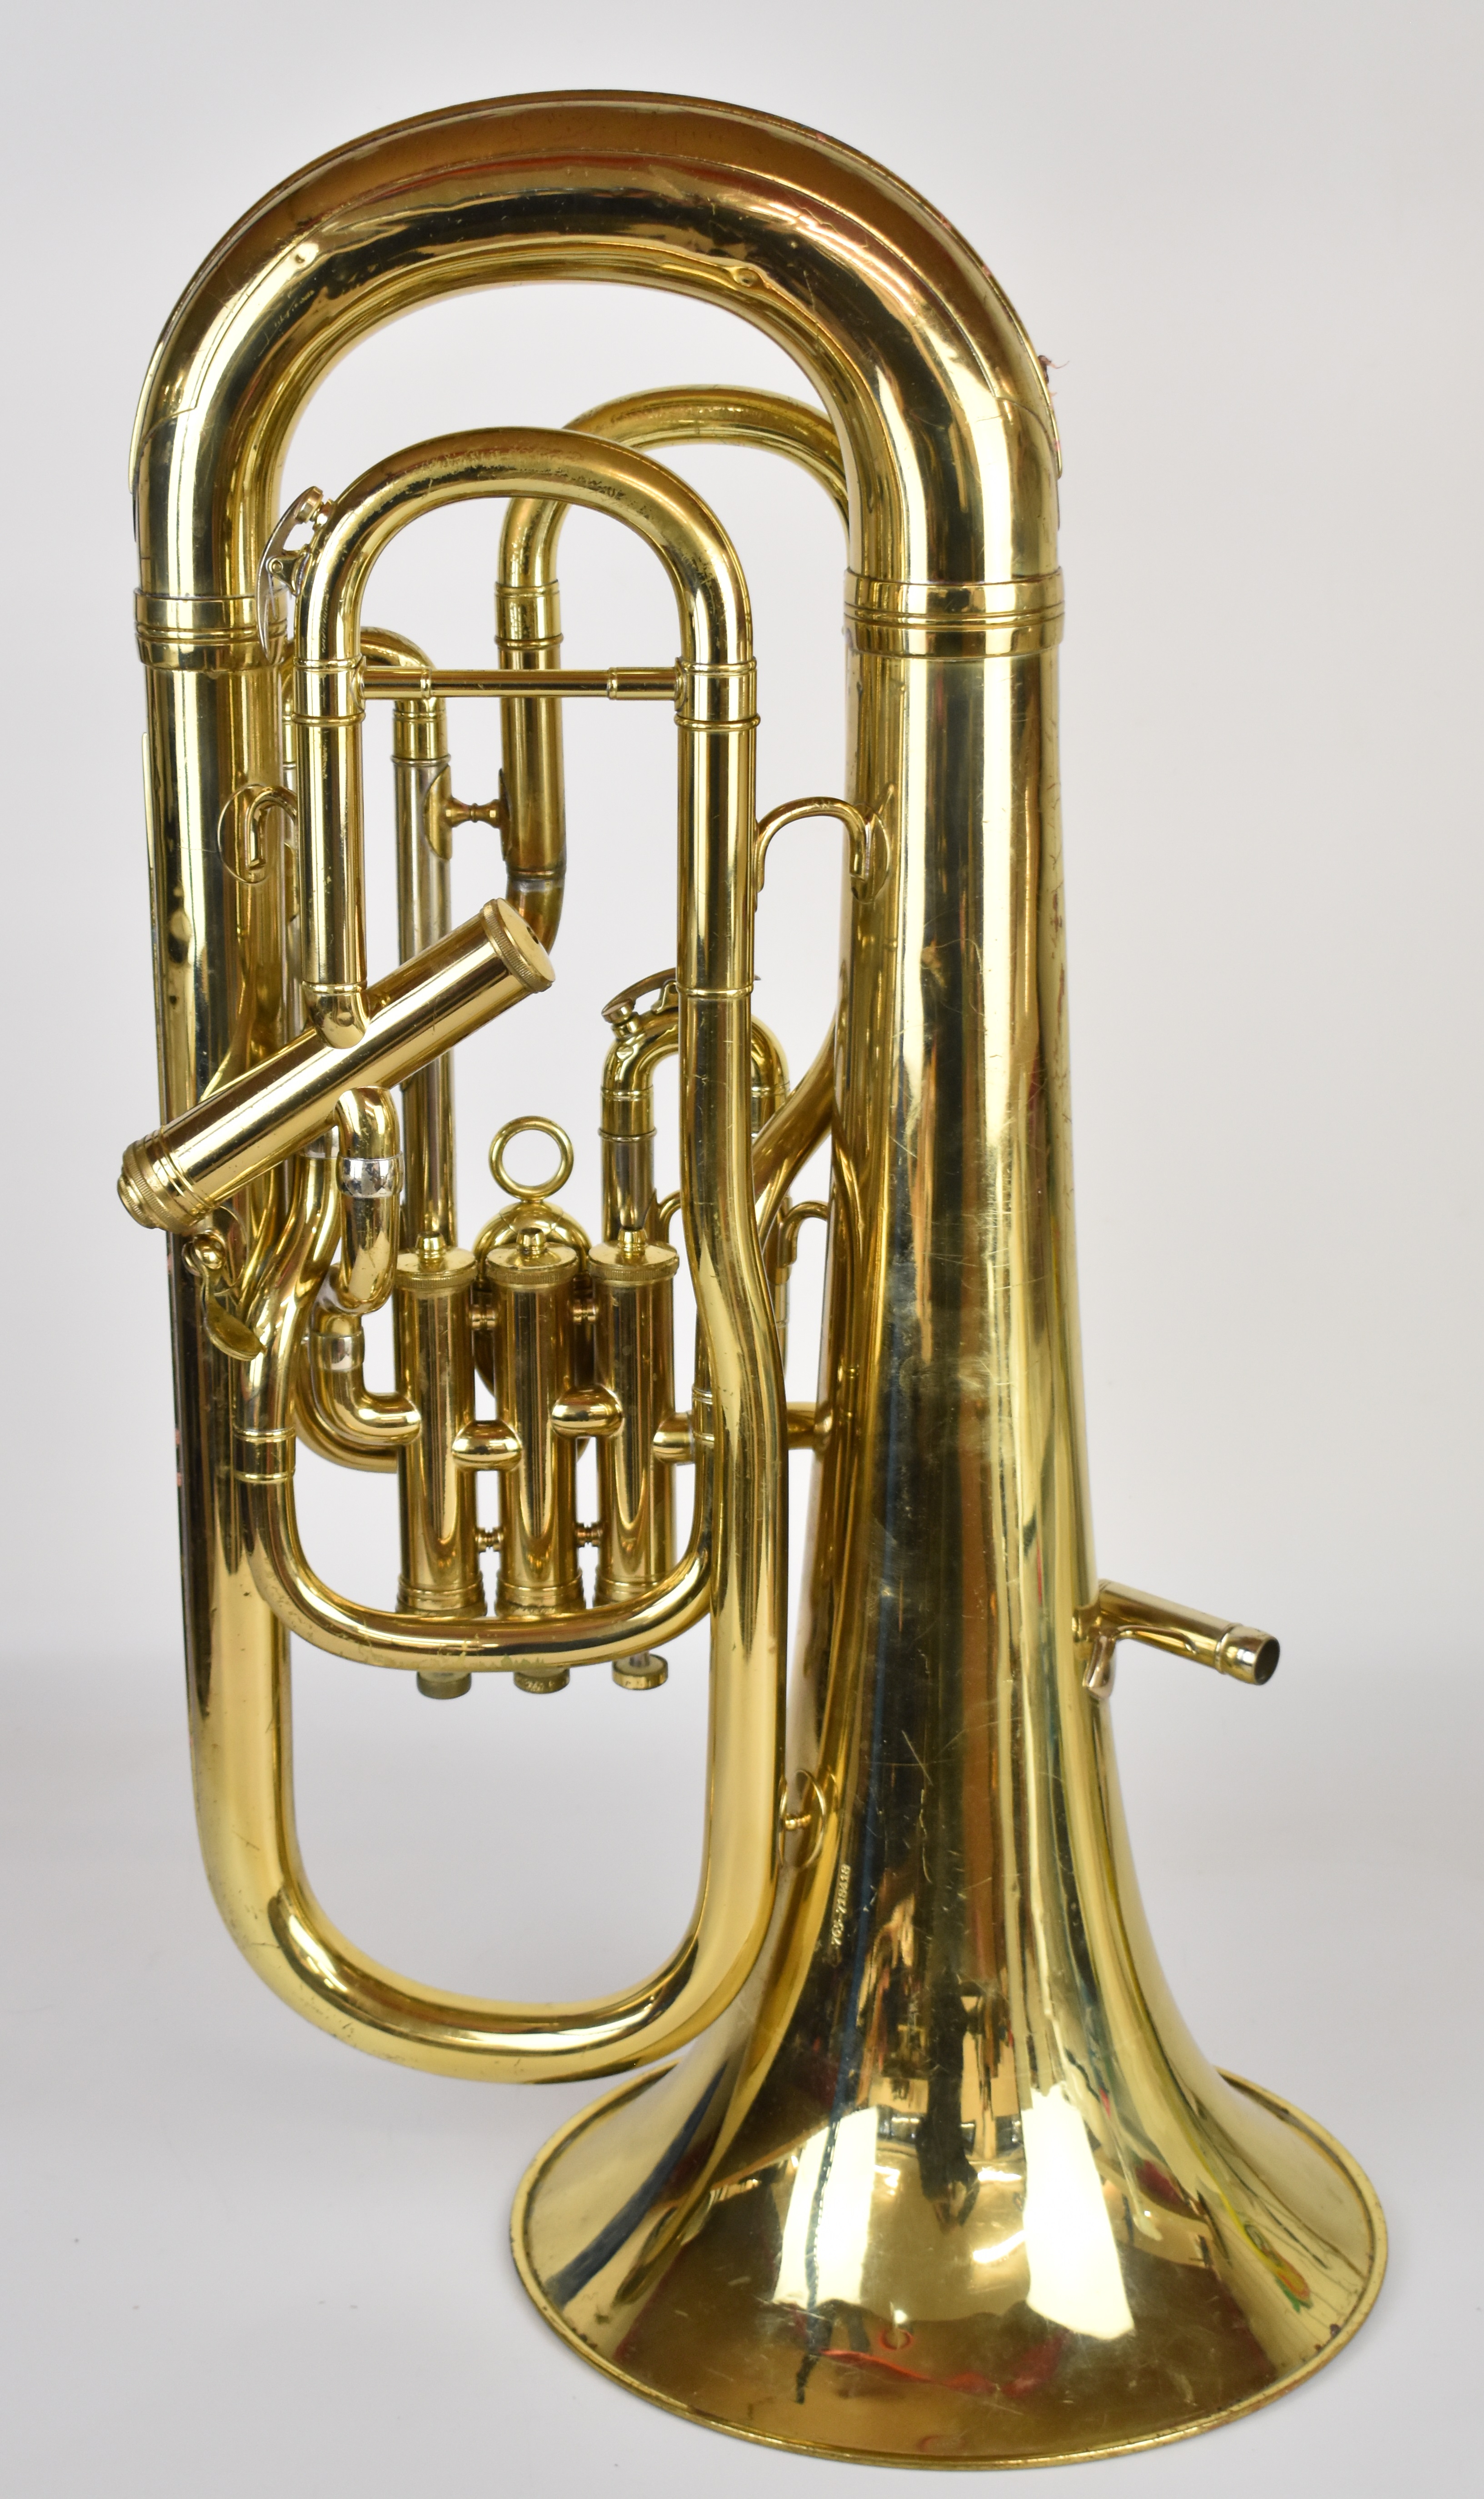 Boosey & Hawkes Besson 700 brass Euphonium, serial no. 765-718418, in fitted hard shell case with - Image 5 of 7